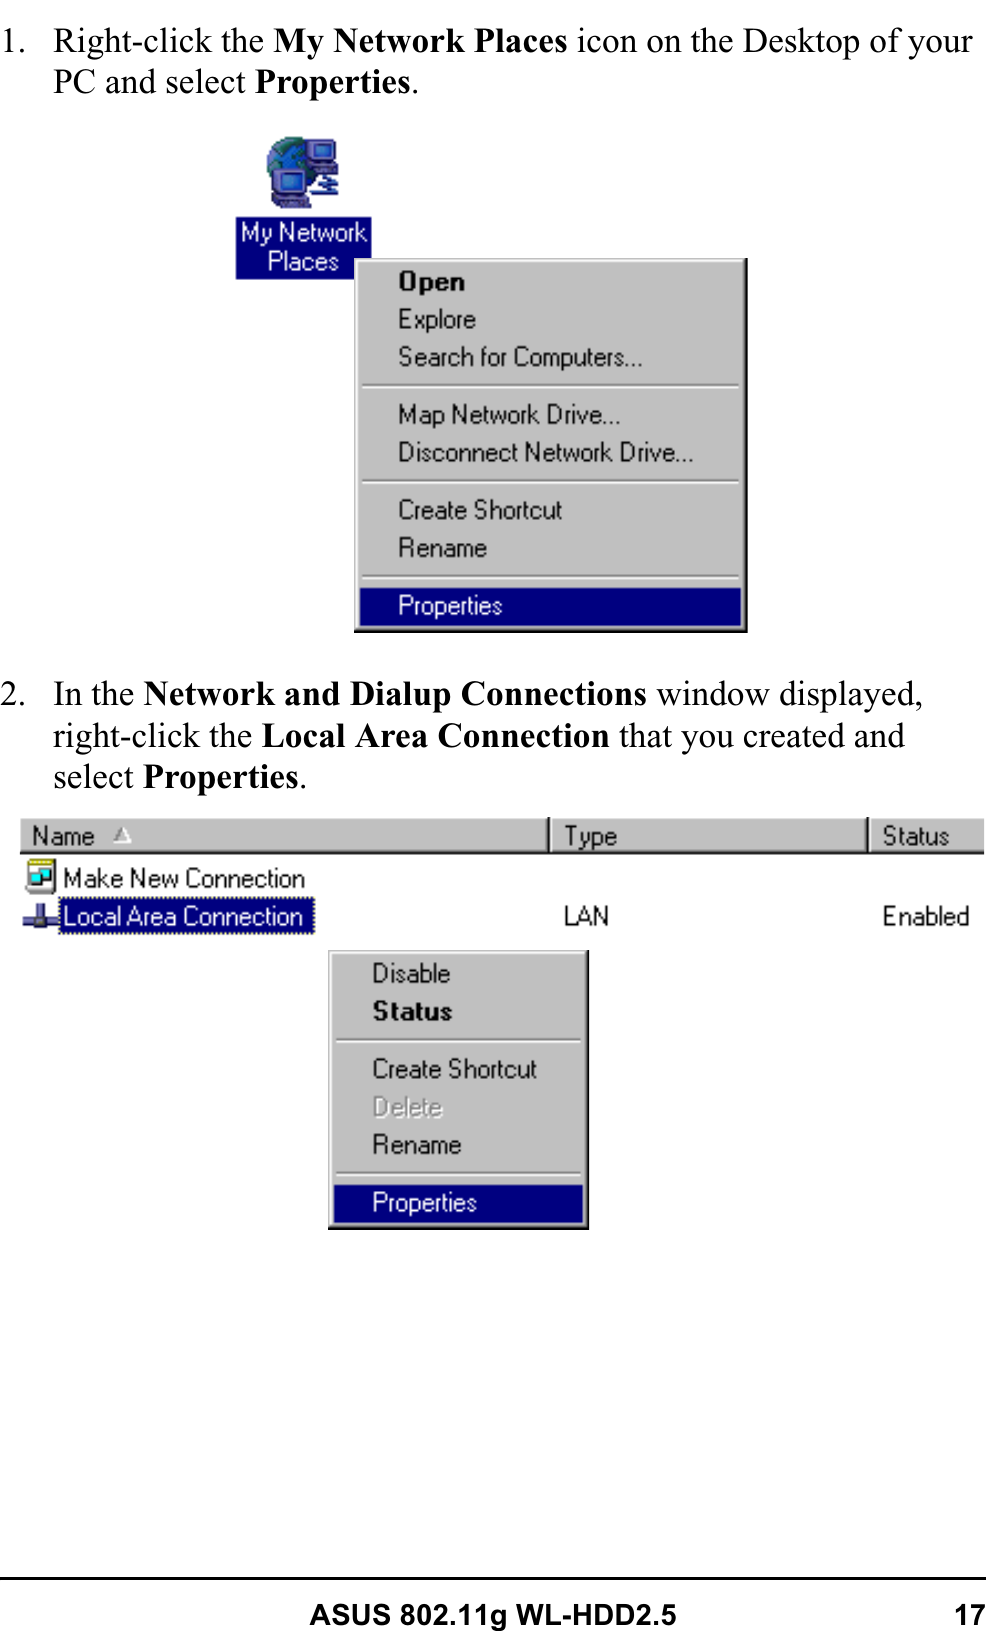 ASUS 802.11g WL-HDD2.5 171. Right-click the My Network Places icon on the Desktop of your PC and select Properties.2. In the Network and Dialup Connections window displayed,right-click the Local Area Connection that you created and select Properties.